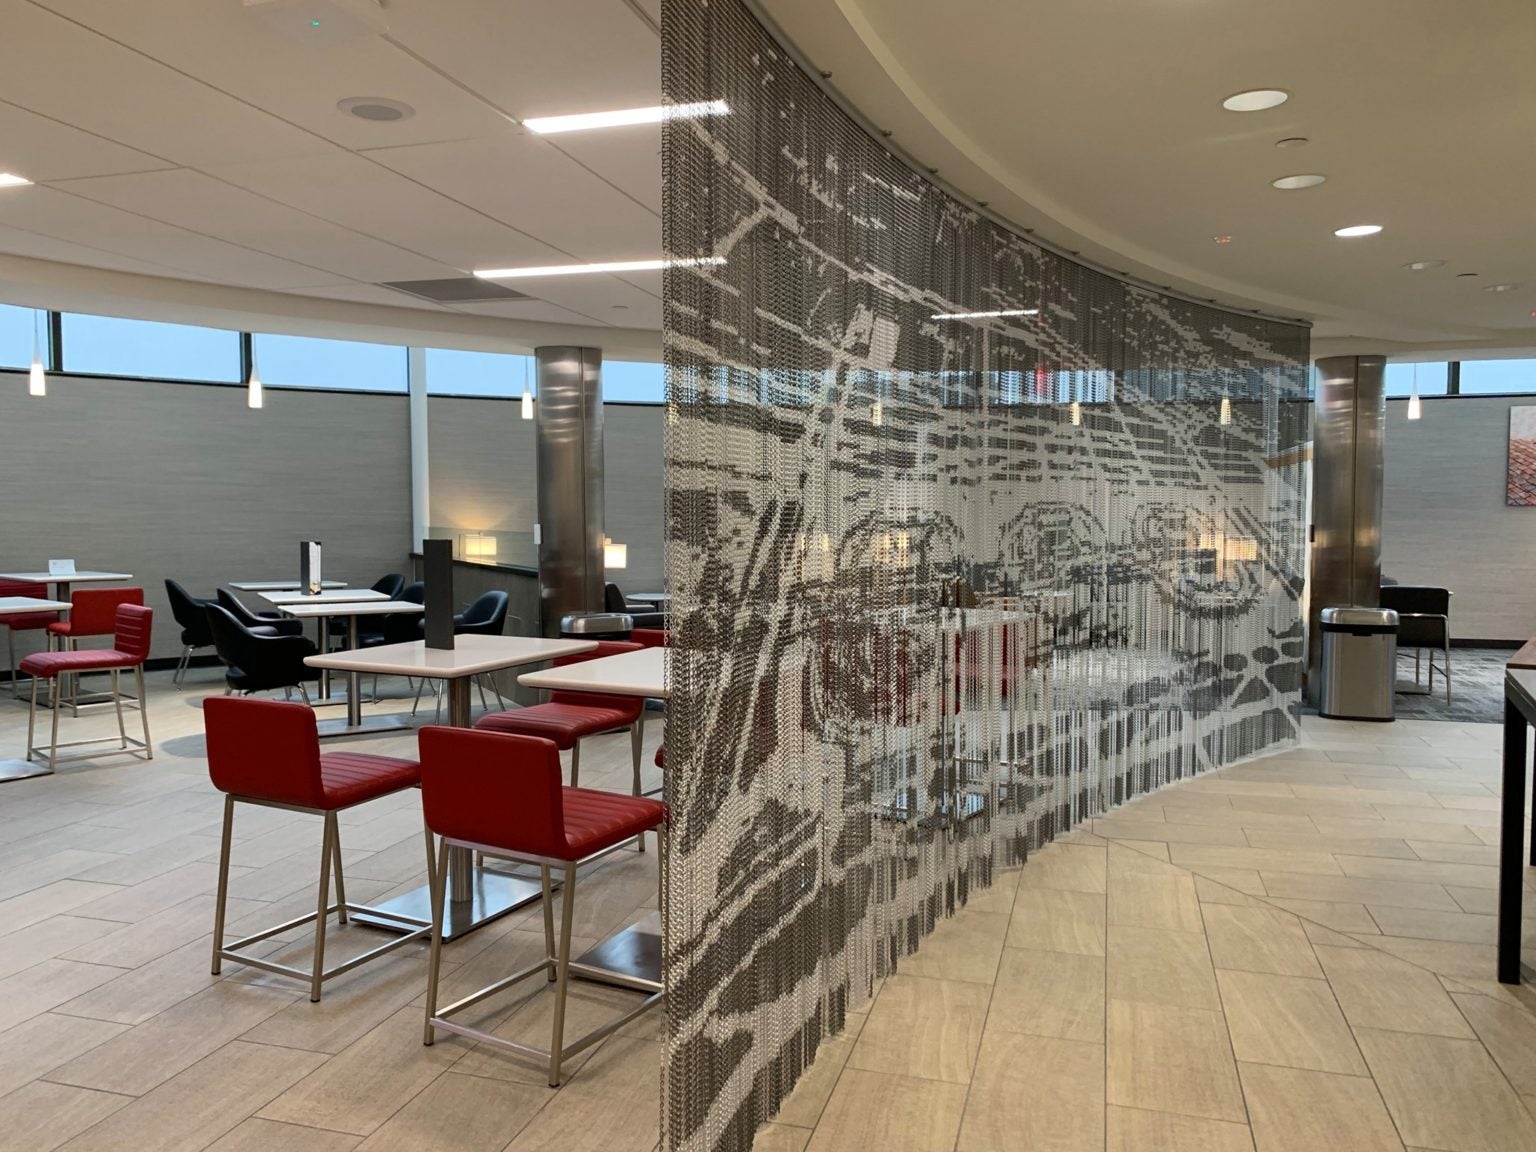 List of Airport Lounges at Dallas Fort Worth Airport [DFW]